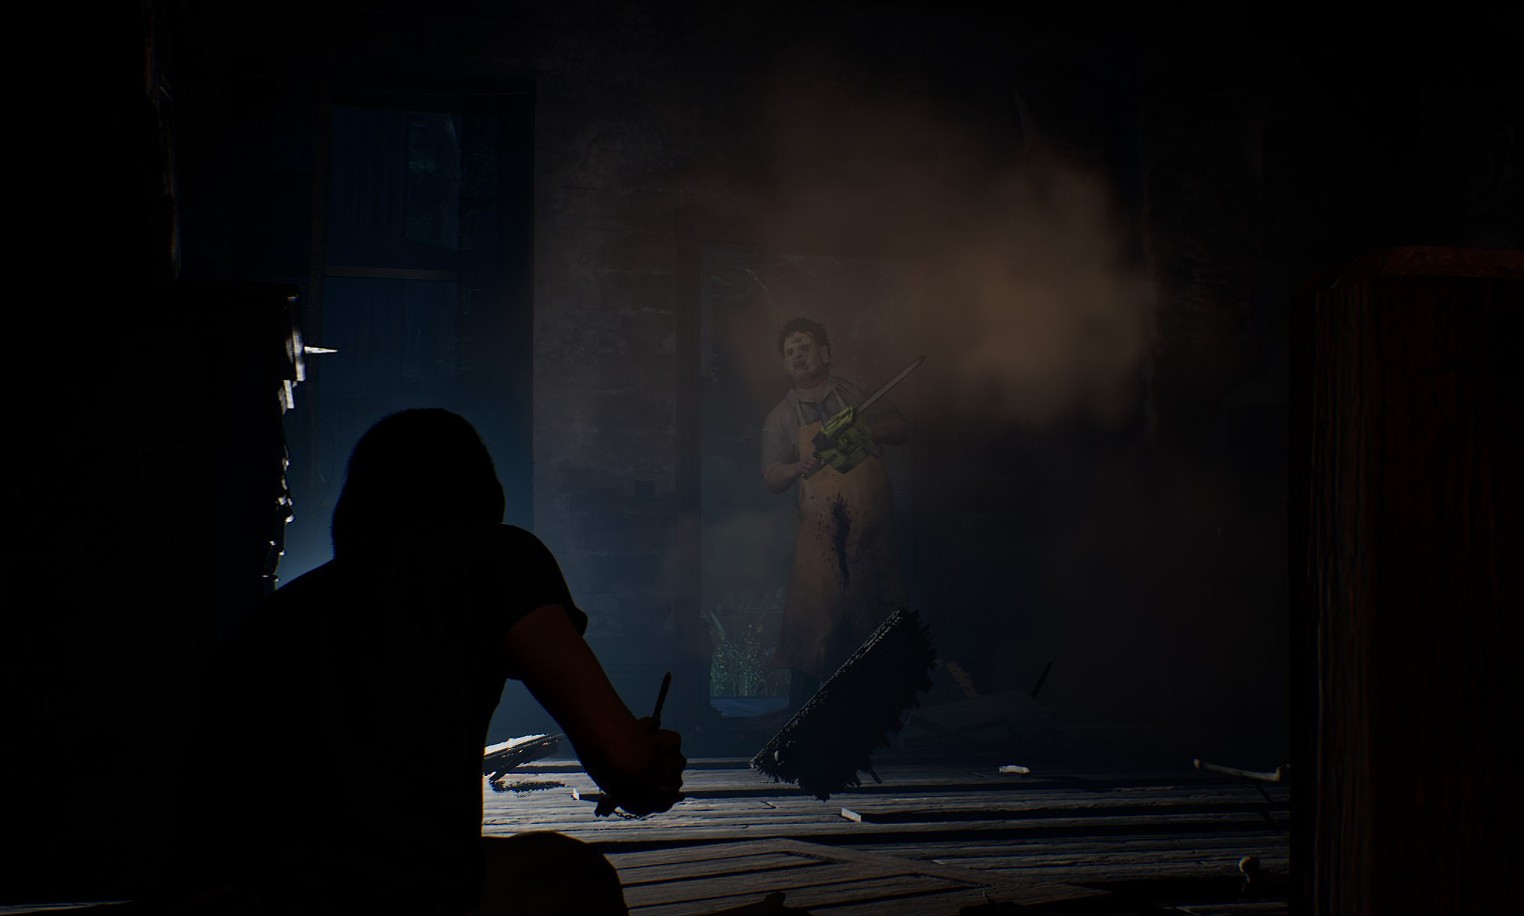 The Texas Chain Saw Massacre Game Coming To PC And Consoles In August